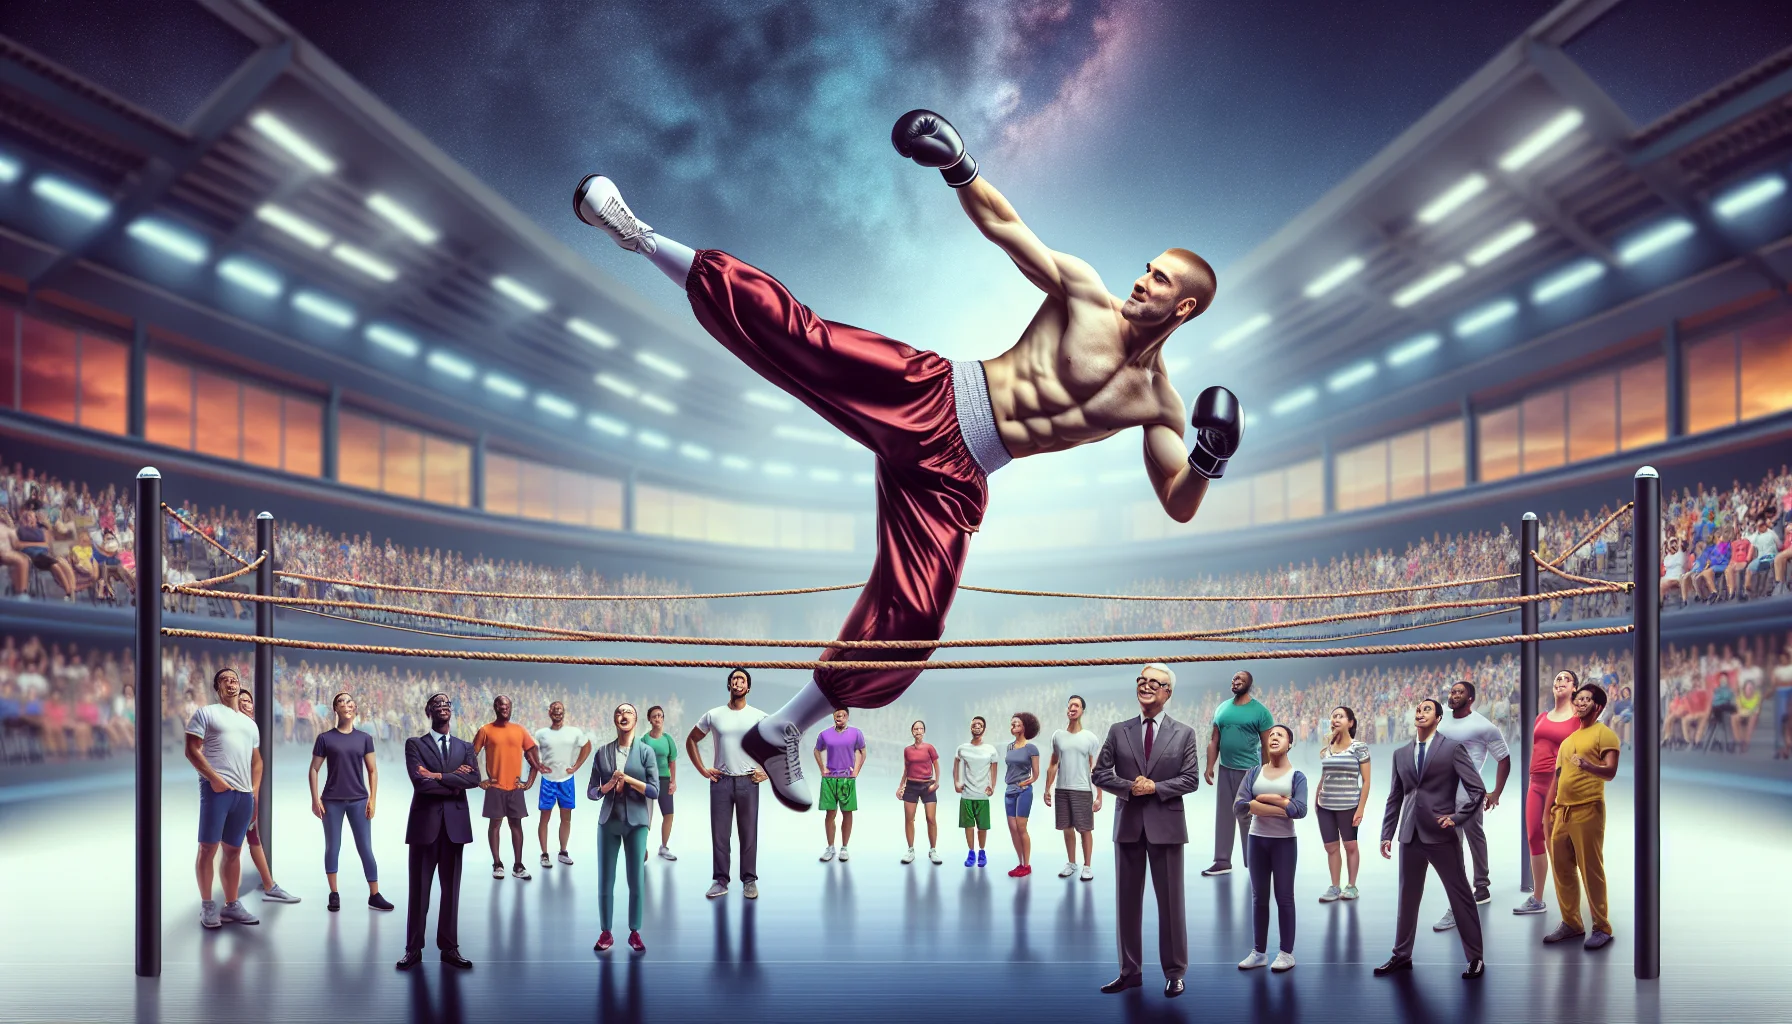 Create a realistic image of a physically fit male with a Caucasian descent, representing a professional kickboxer showcasing highlights of his skills in a humorous setting. The kickboxer is performing a dynamic high kick while balancing on a comedy tightrope over a gym. Beneath, people of various genders and descents look up in surprise and amusement. The setting promotes the fun aspects of physical fitness and invites everyone to join in training.